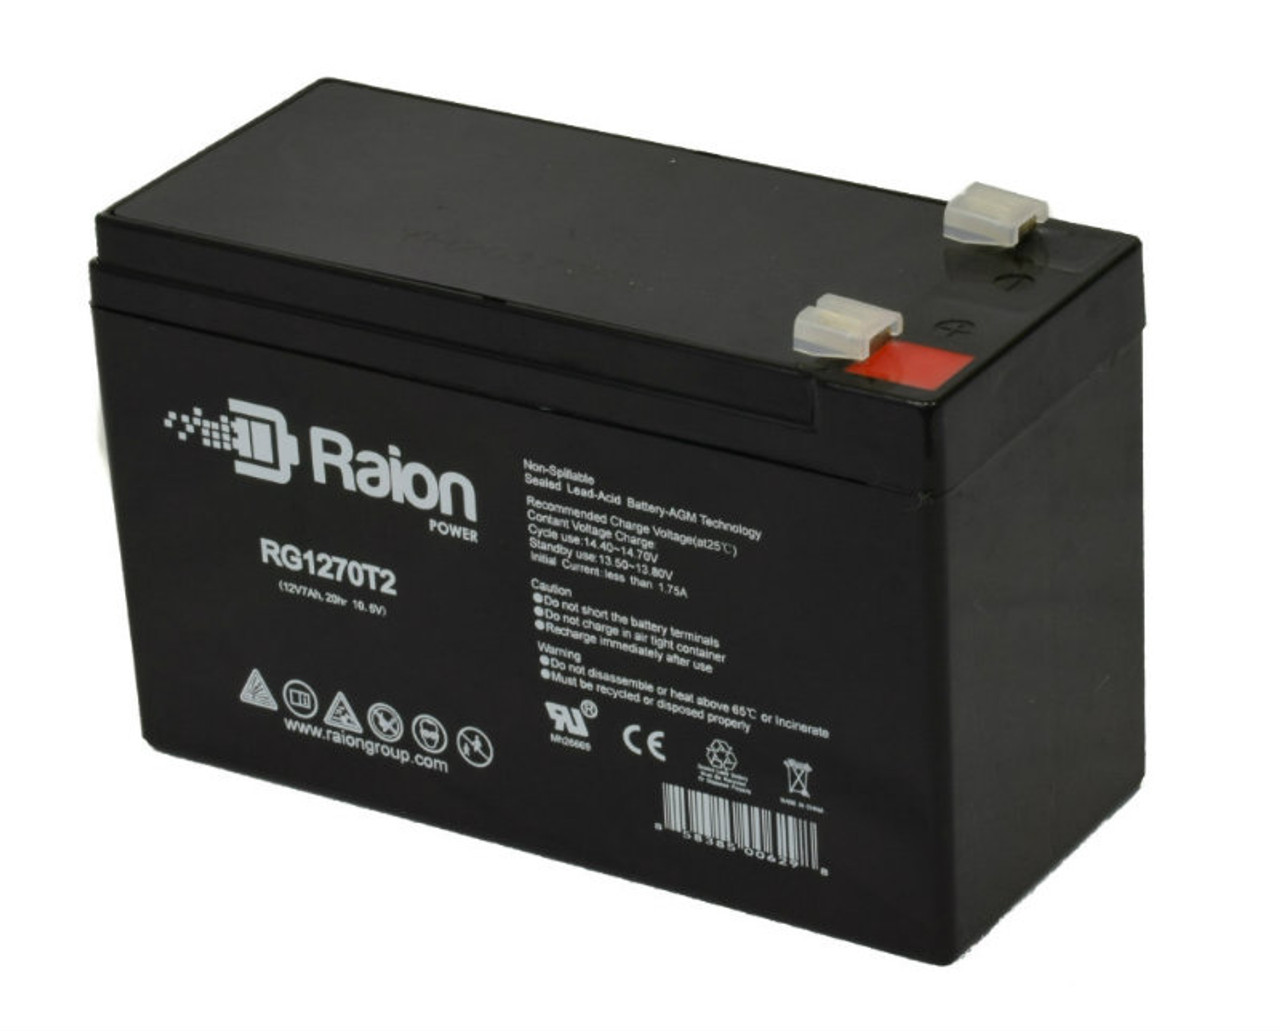 Raion Power RG1270T2 12V 7Ah Rechargeable Battery for TLV1270F2